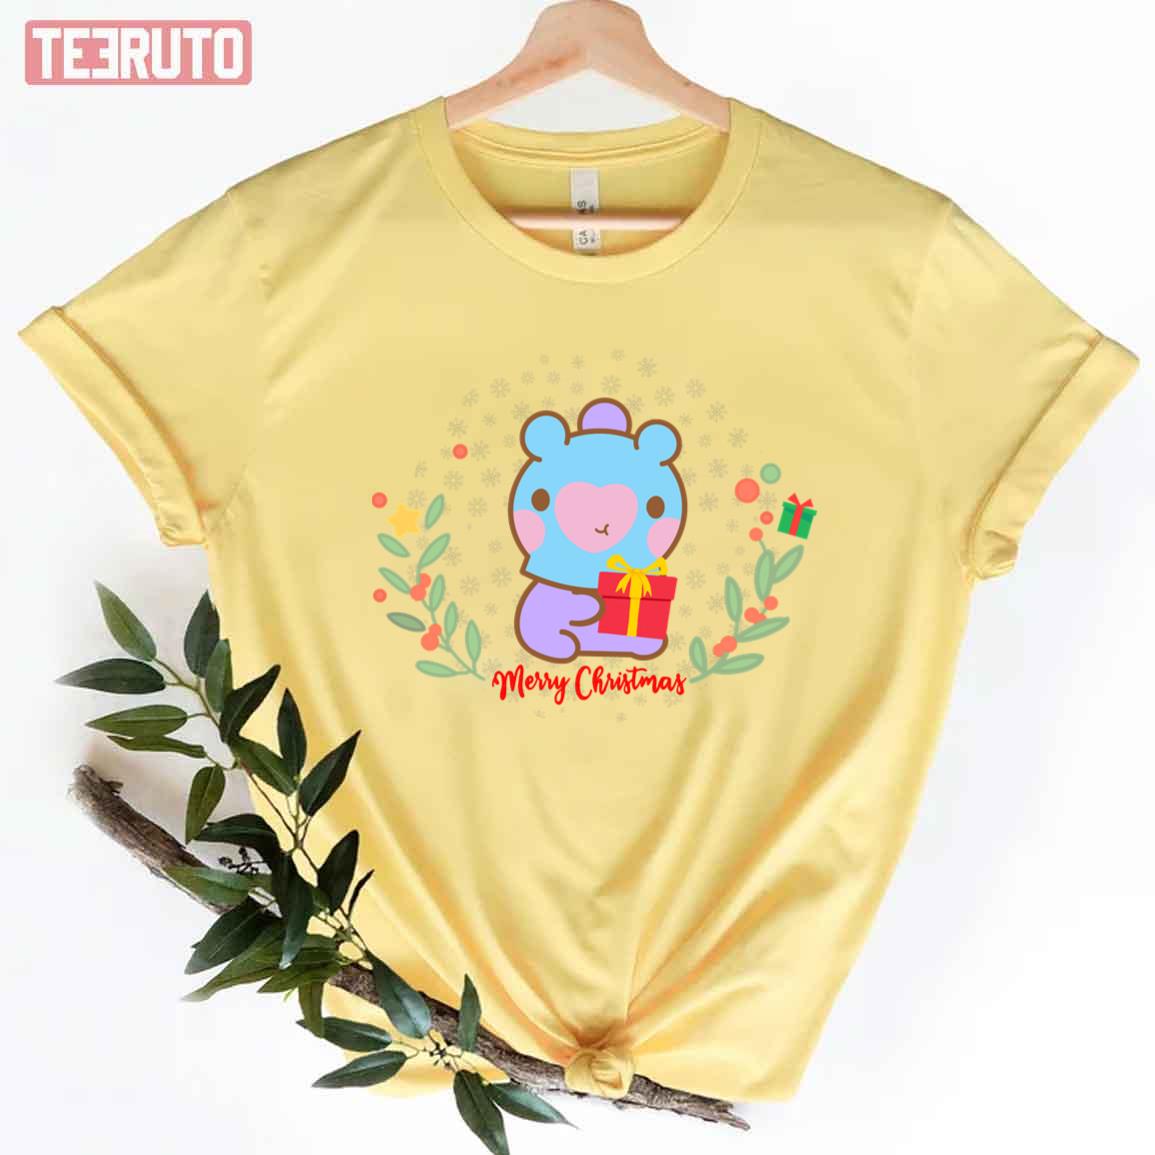 Cute Bts Bt21 Character Mang Bts Bt21 Christmas Gift For Jhope Biased Unisex T-shirt